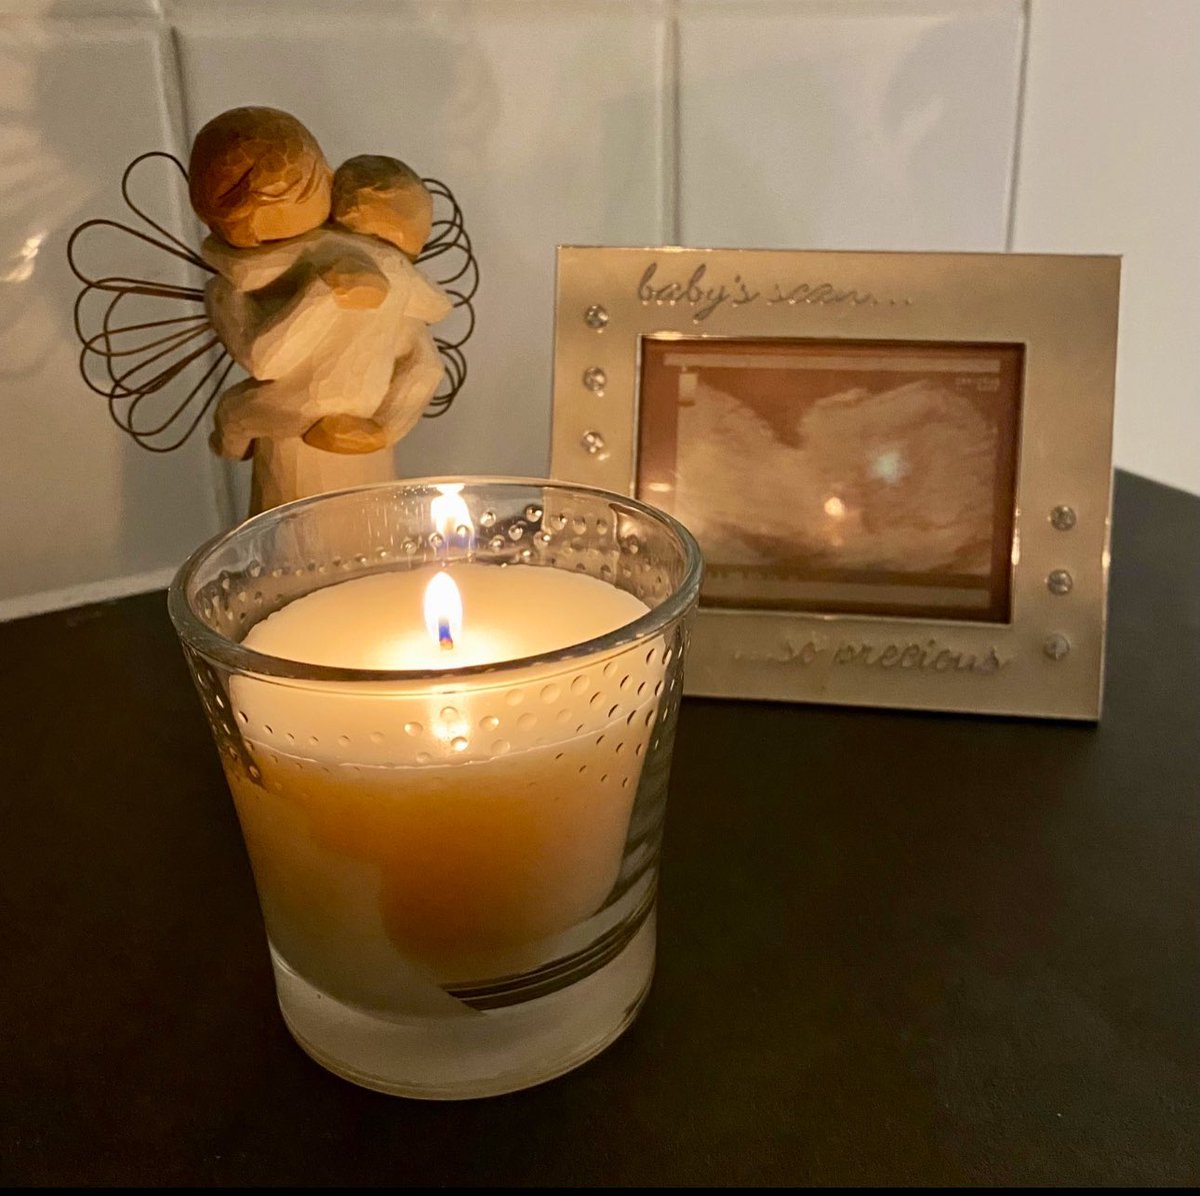 Beau - 09.04.08 

An angel in the book of life wrote down my baby’s birth, 
Then whispered as she closed the book, “Too beautiful for earth”

Thinking of all the babies gone too soon ❤️ #WaveOfLight #BabyLossAwarenessWeek